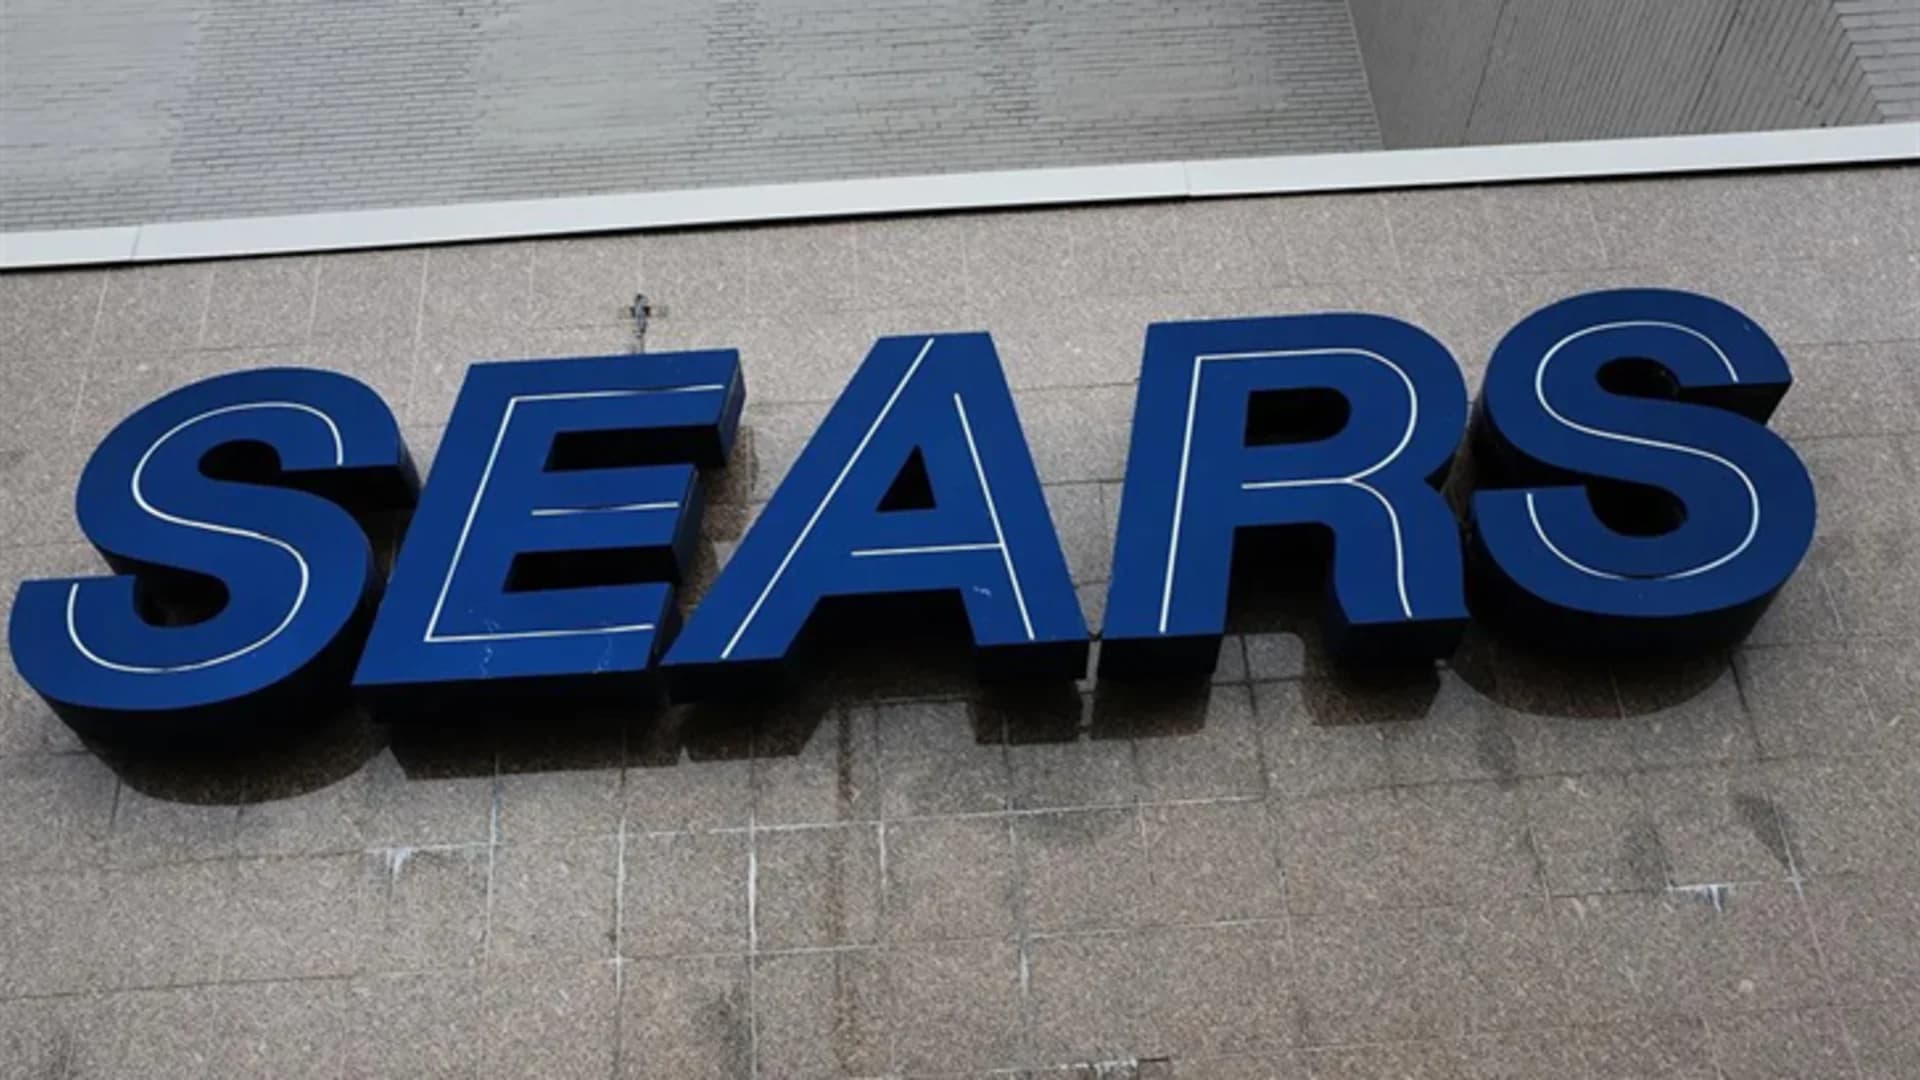 Sears survives a near-death experience, but for how long?